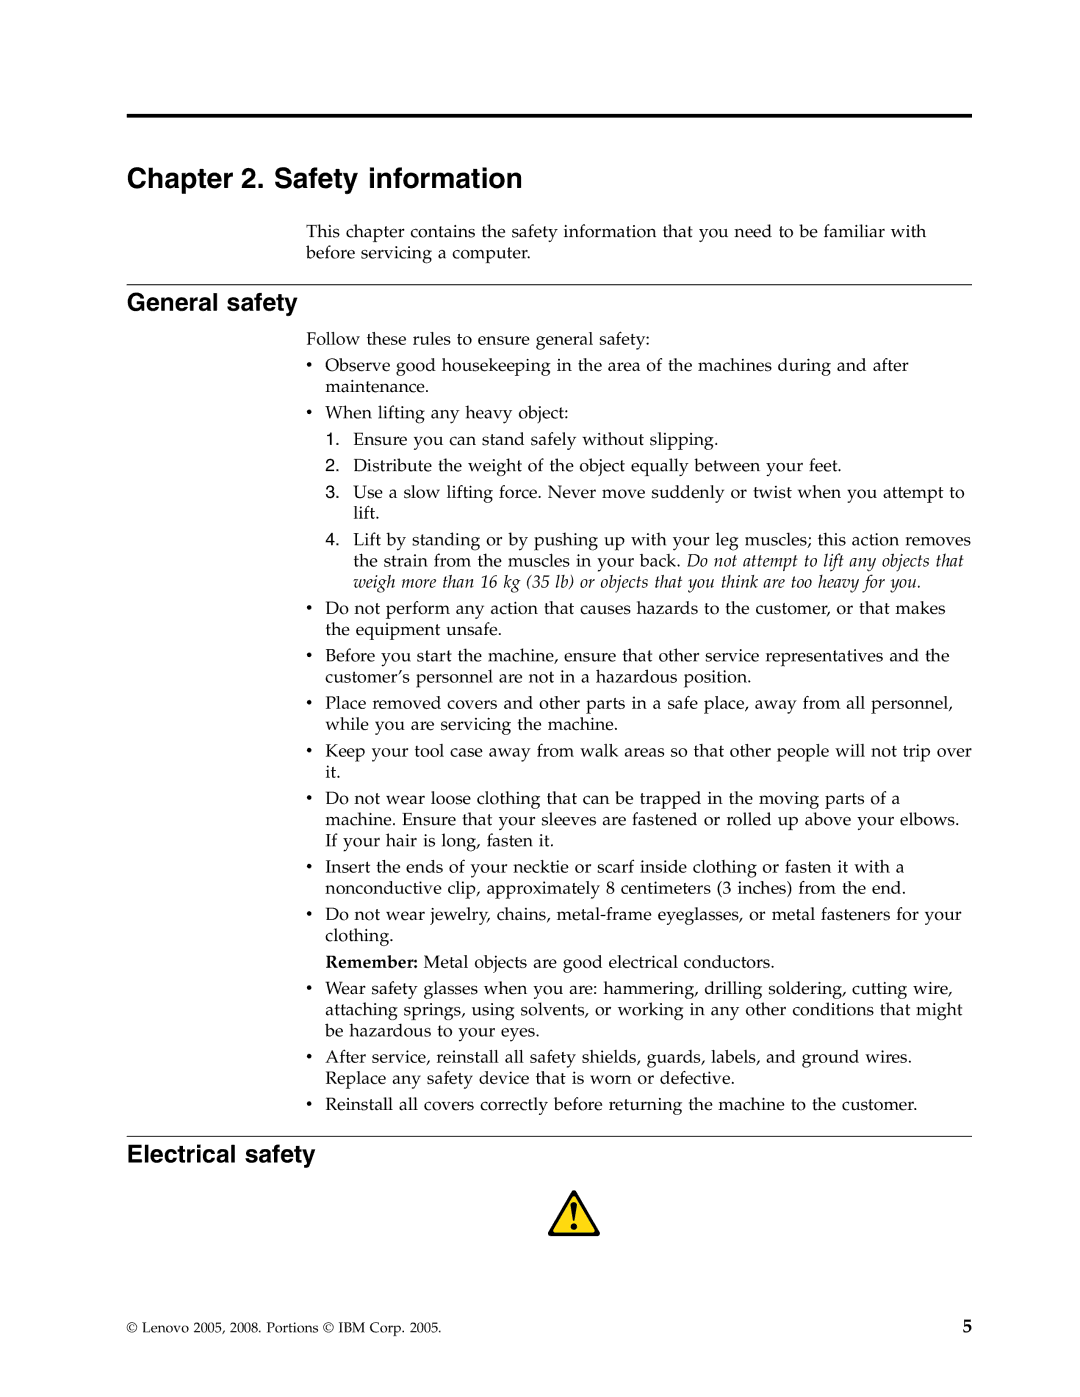 Lenovo E200 manual Safety information, General safety, Electrical safety 